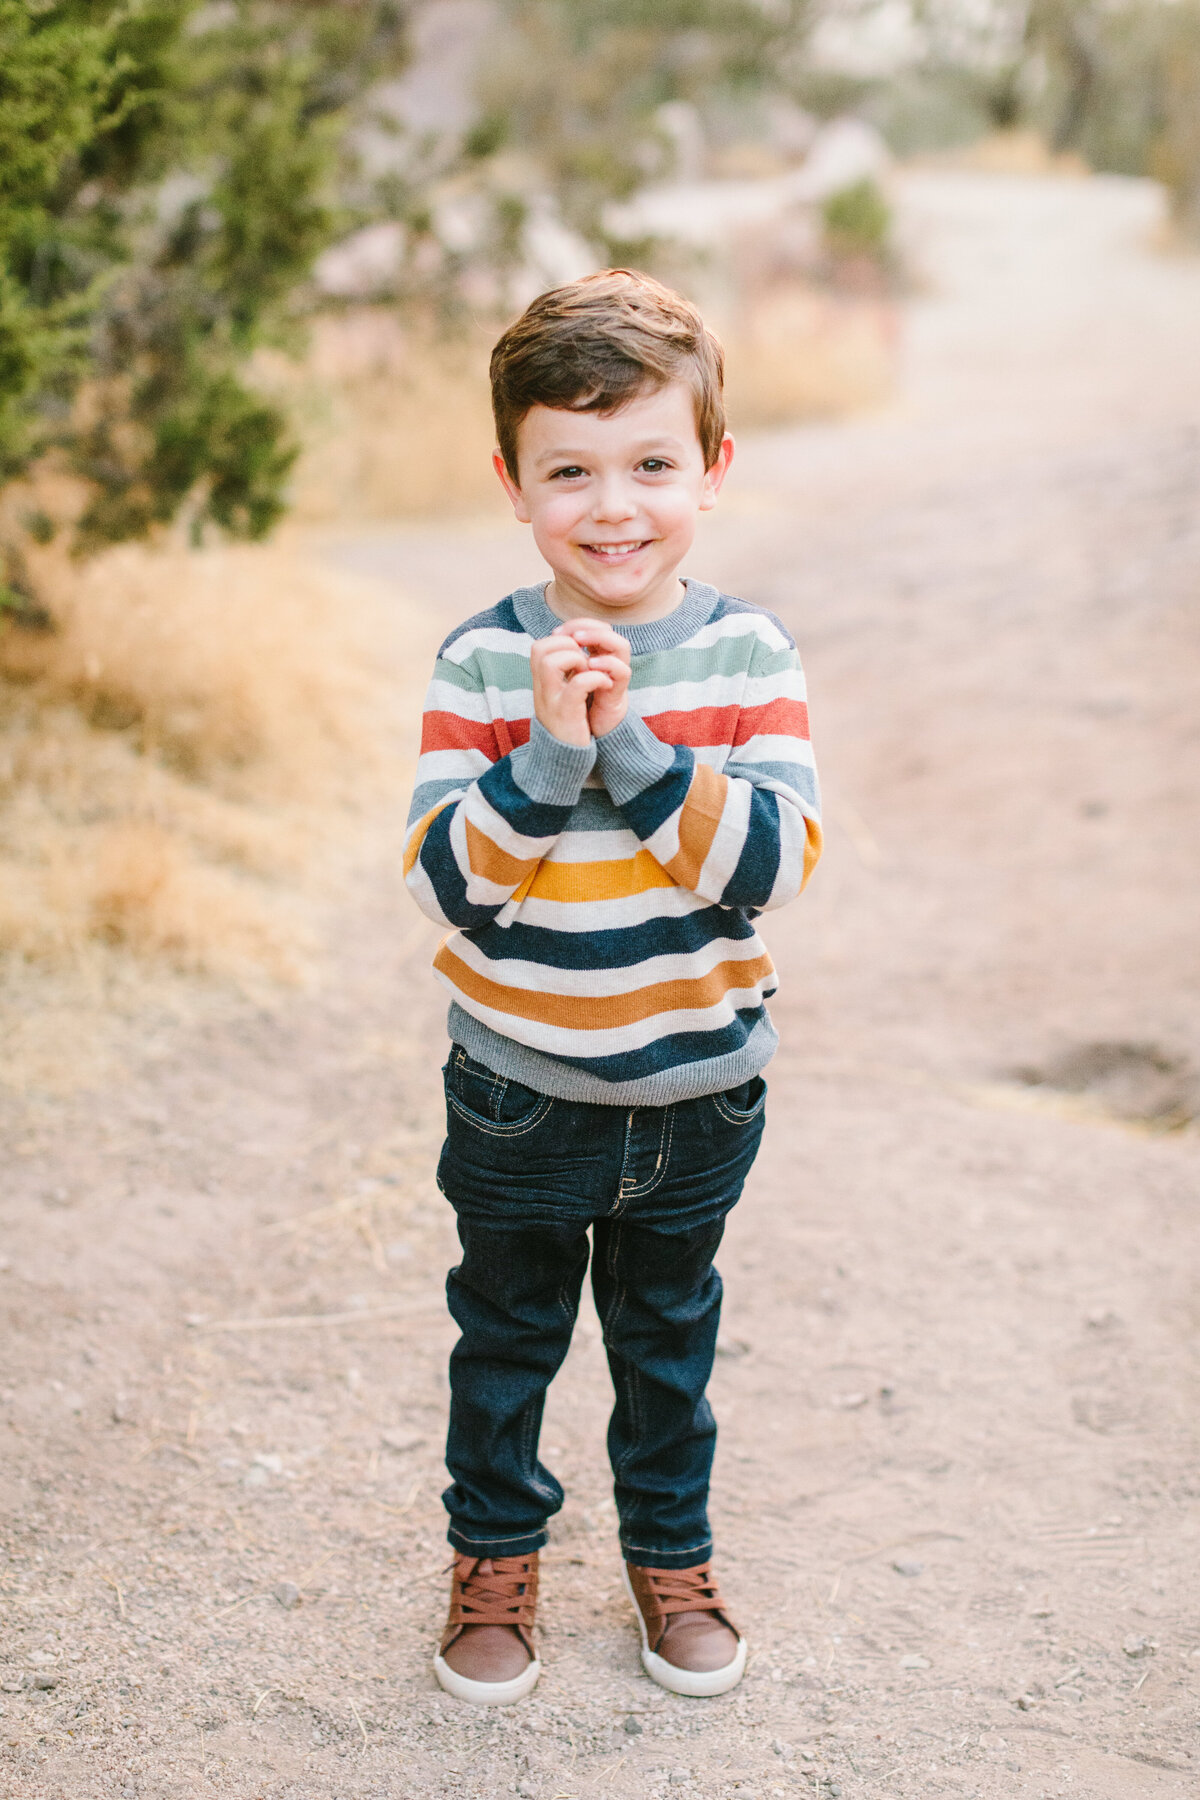 Best California and Texas Family Photographer-Jodee Debes Photography-222